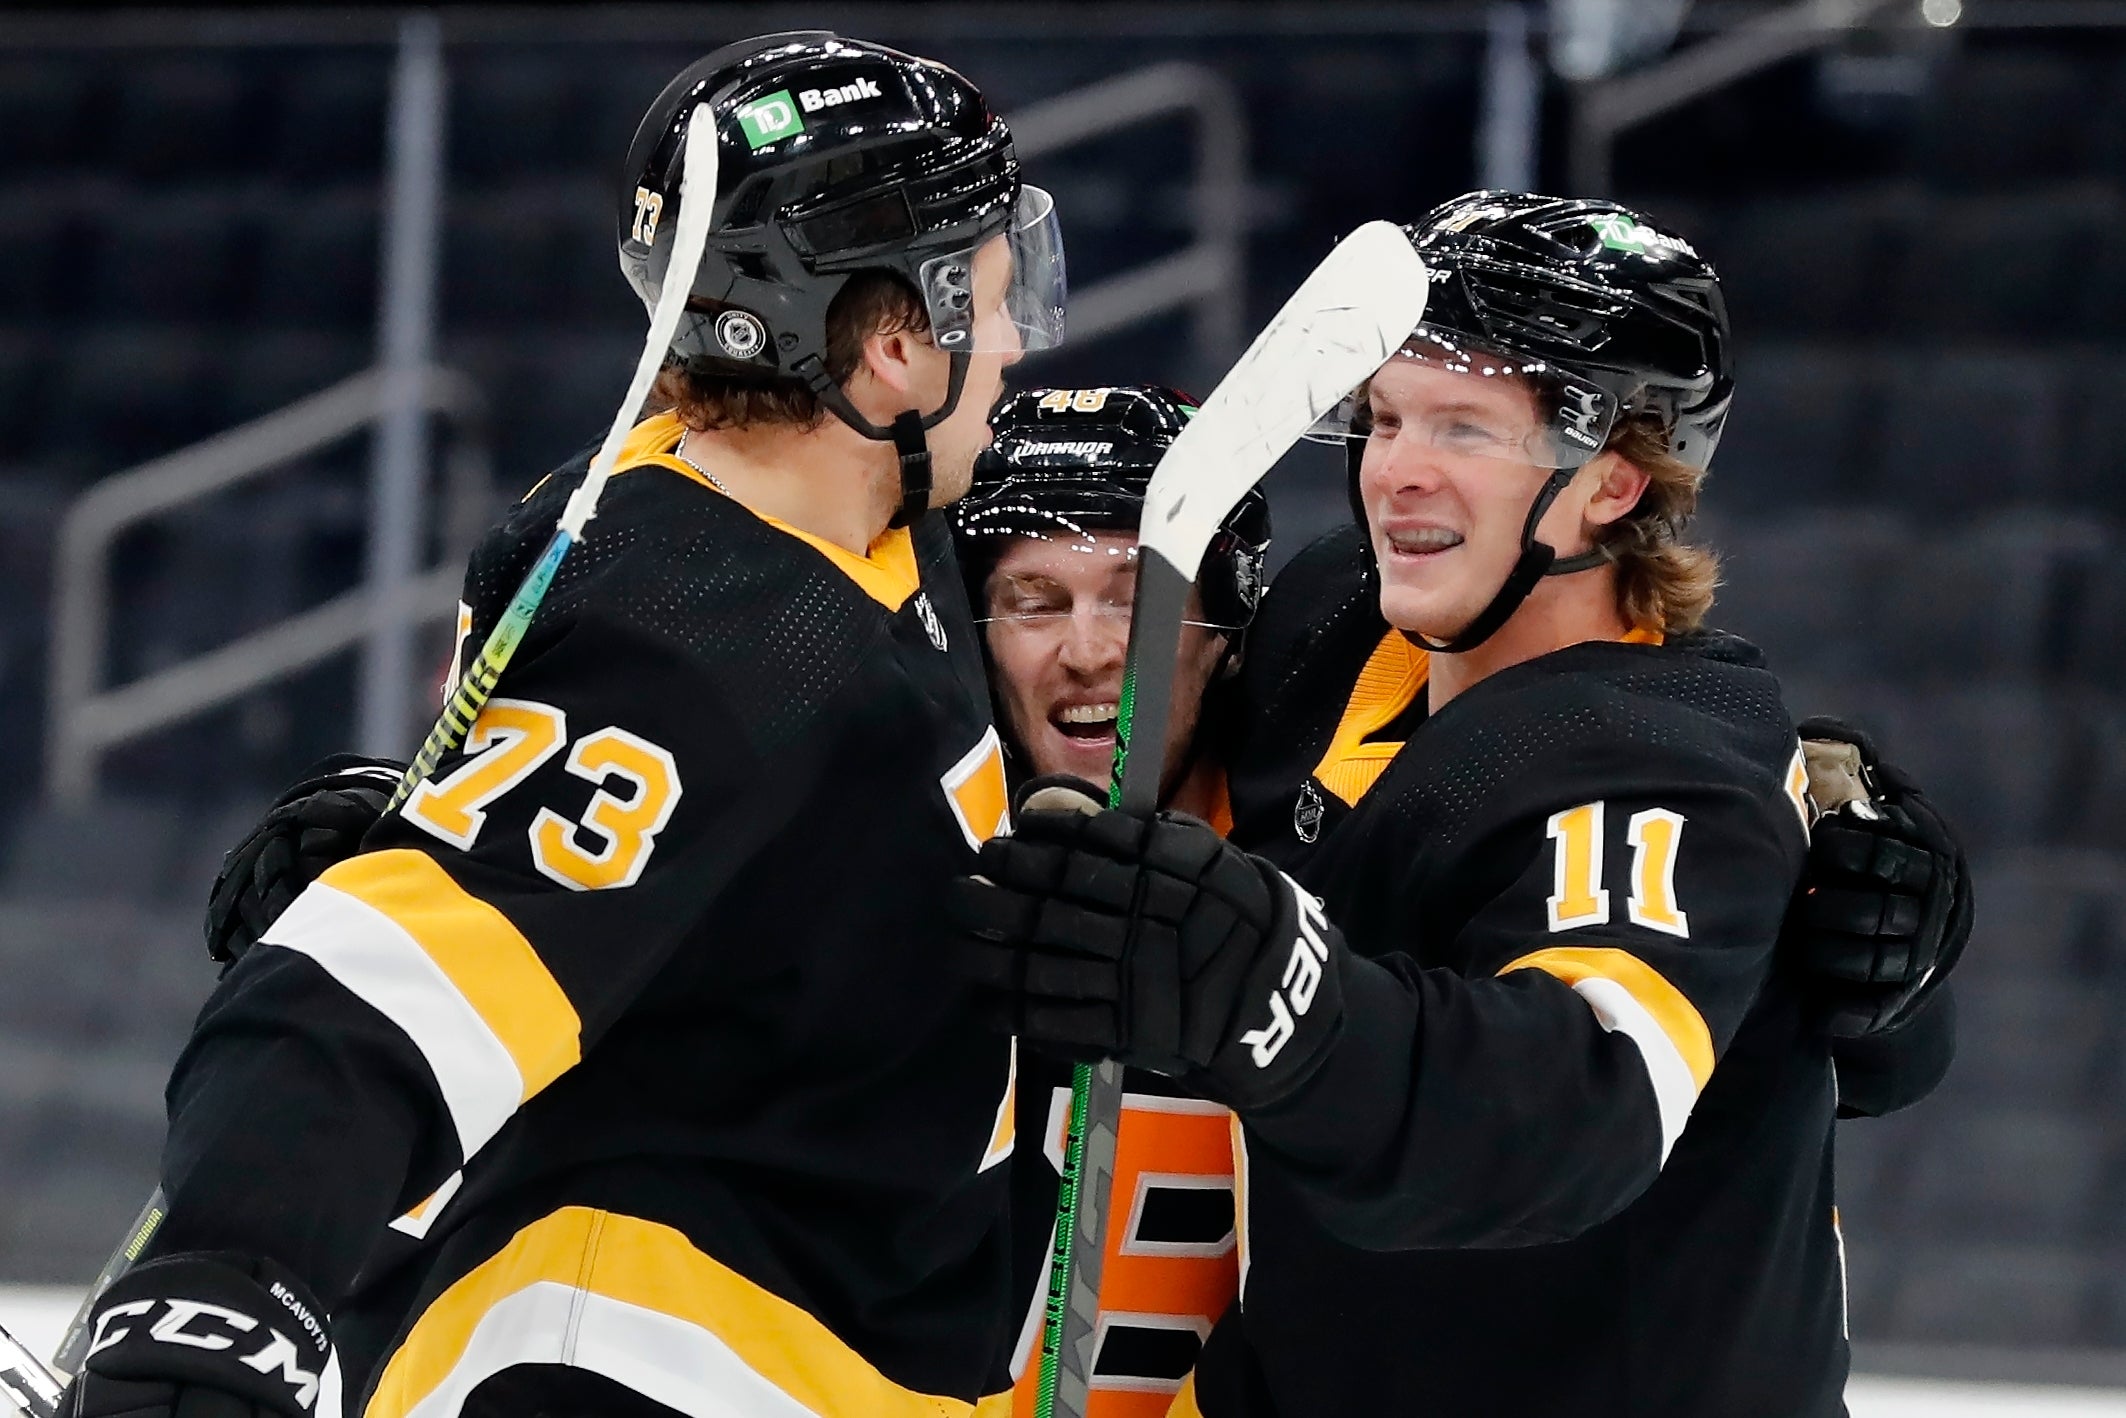 Boston Bruins' Trent Frederic (11) celebrates his goal with Charlie McAvoy (73) and Matt Grzelcyk (48) during the second period of an NHL hockey game, Friday, March 5, 2021, in Boston.